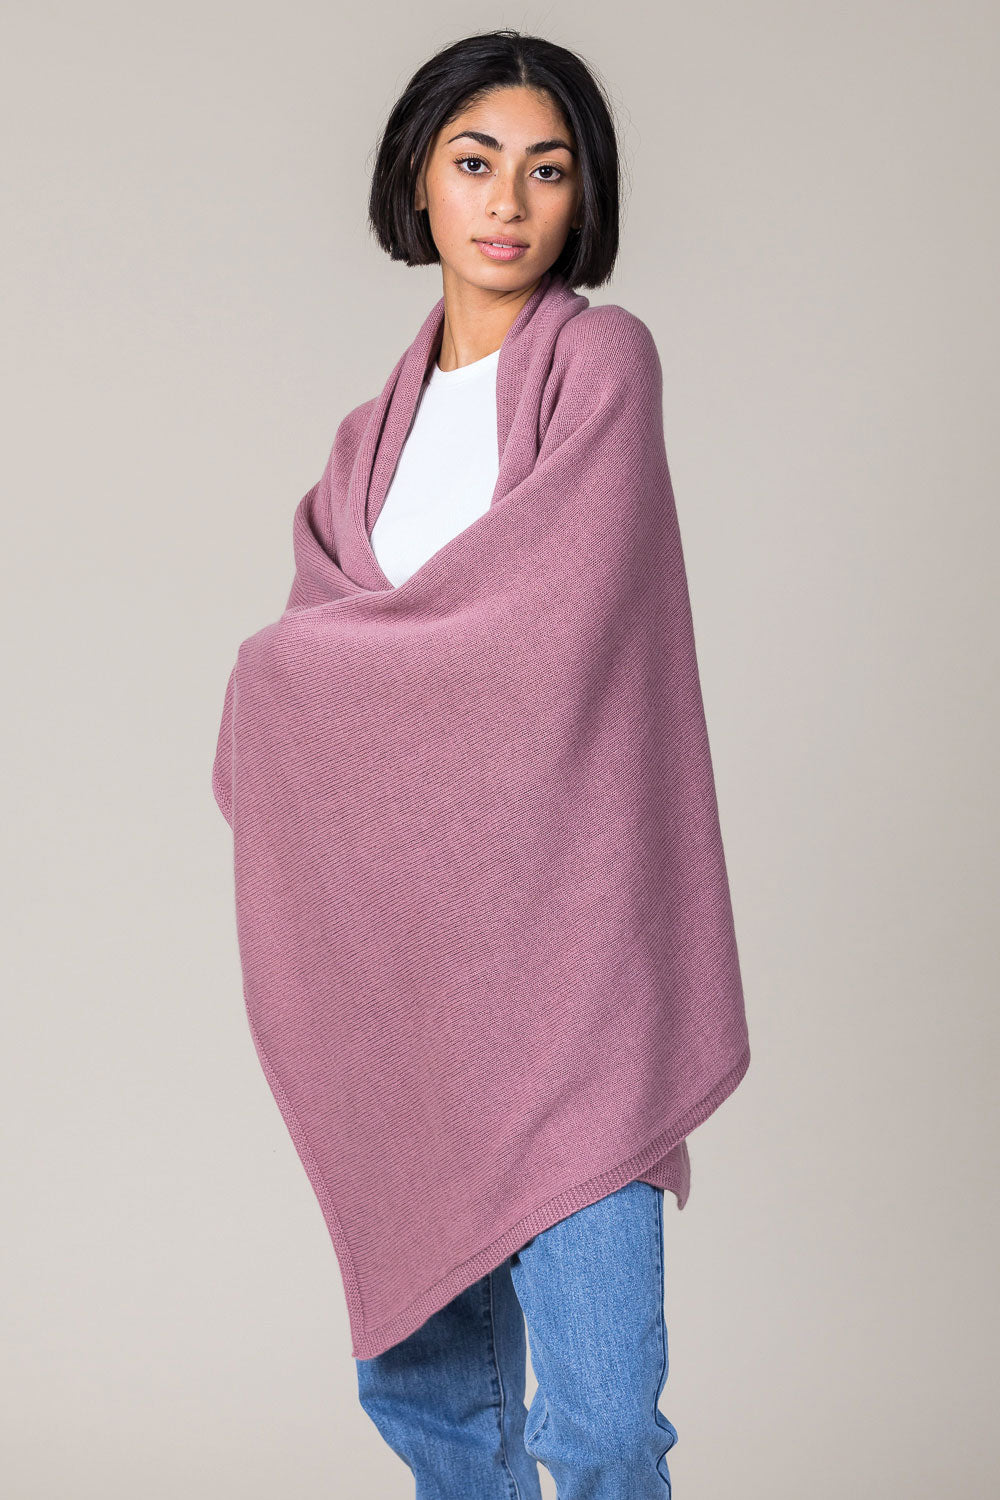 Cashmere Travel Wrap in Shawl Pink